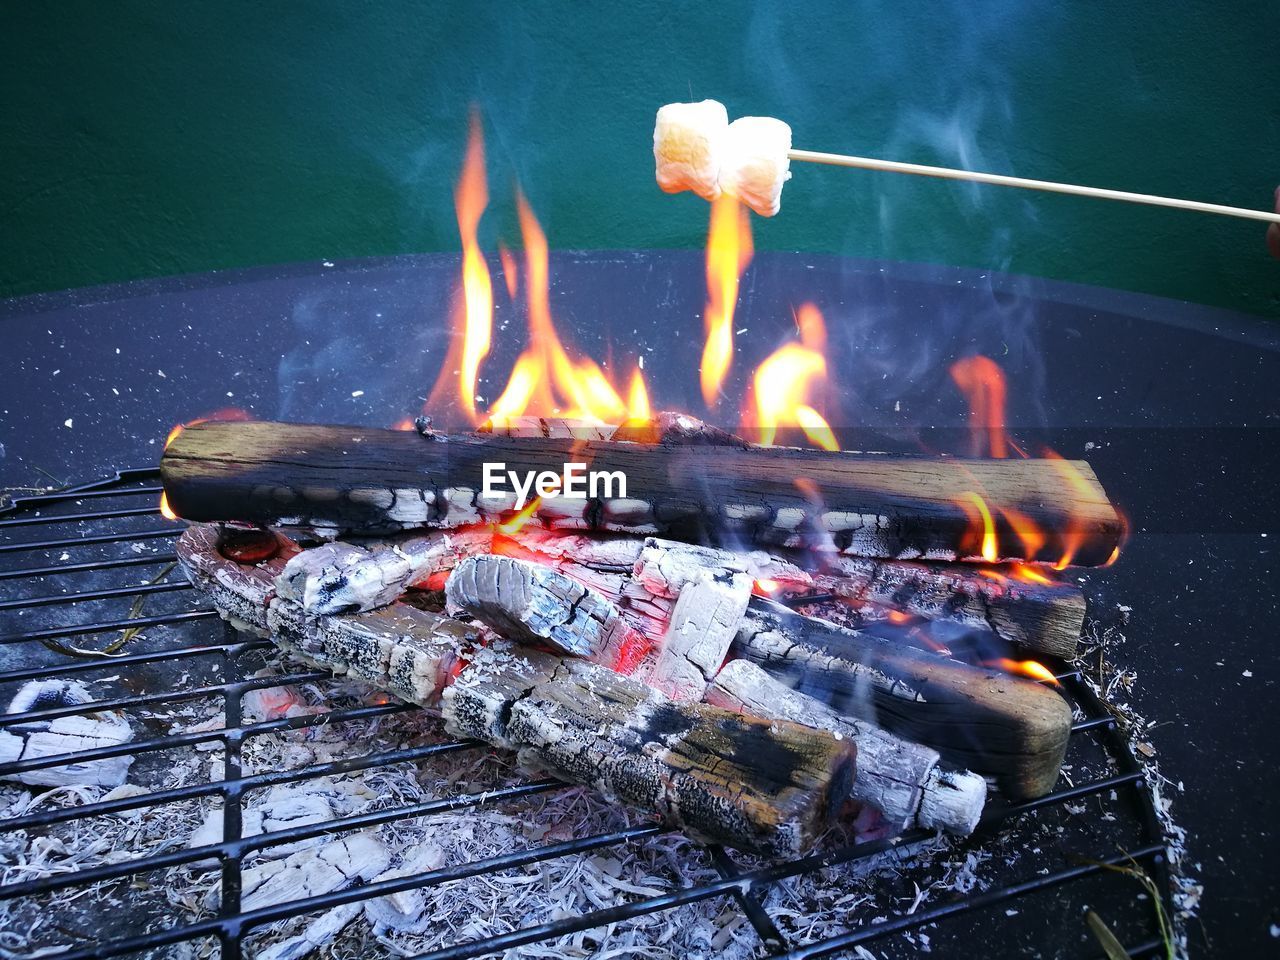 Marshmallows being roasted on barbecue grill